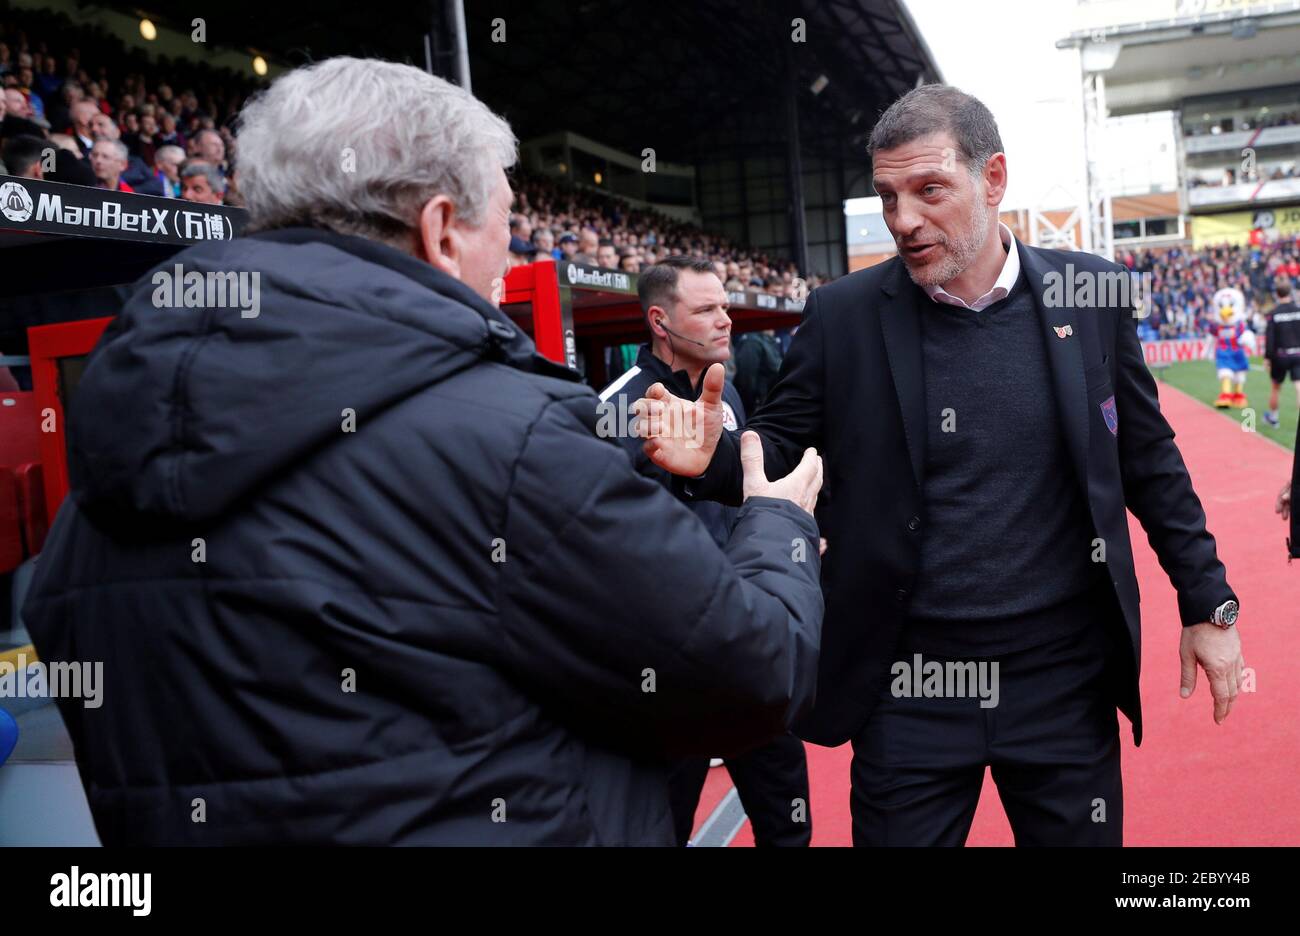 Soccer Football - Premier League - Crystal Palace vs West Ham United - Selhurst Park, London, Britain - October 28, 2017   Crystal Palace manager Roy Hodgson and West Ham United manager Slaven Bilic shake hands   REUTERS/Eddie Keogh    EDITORIAL USE ONLY. No use with unauthorized audio, video, data, fixture lists, club/league logos or 'live' services. Online in-match use limited to 75 images, no video emulation. No use in betting, games or single club/league/player publications. Please contact your account representative for further details.? Stock Photo